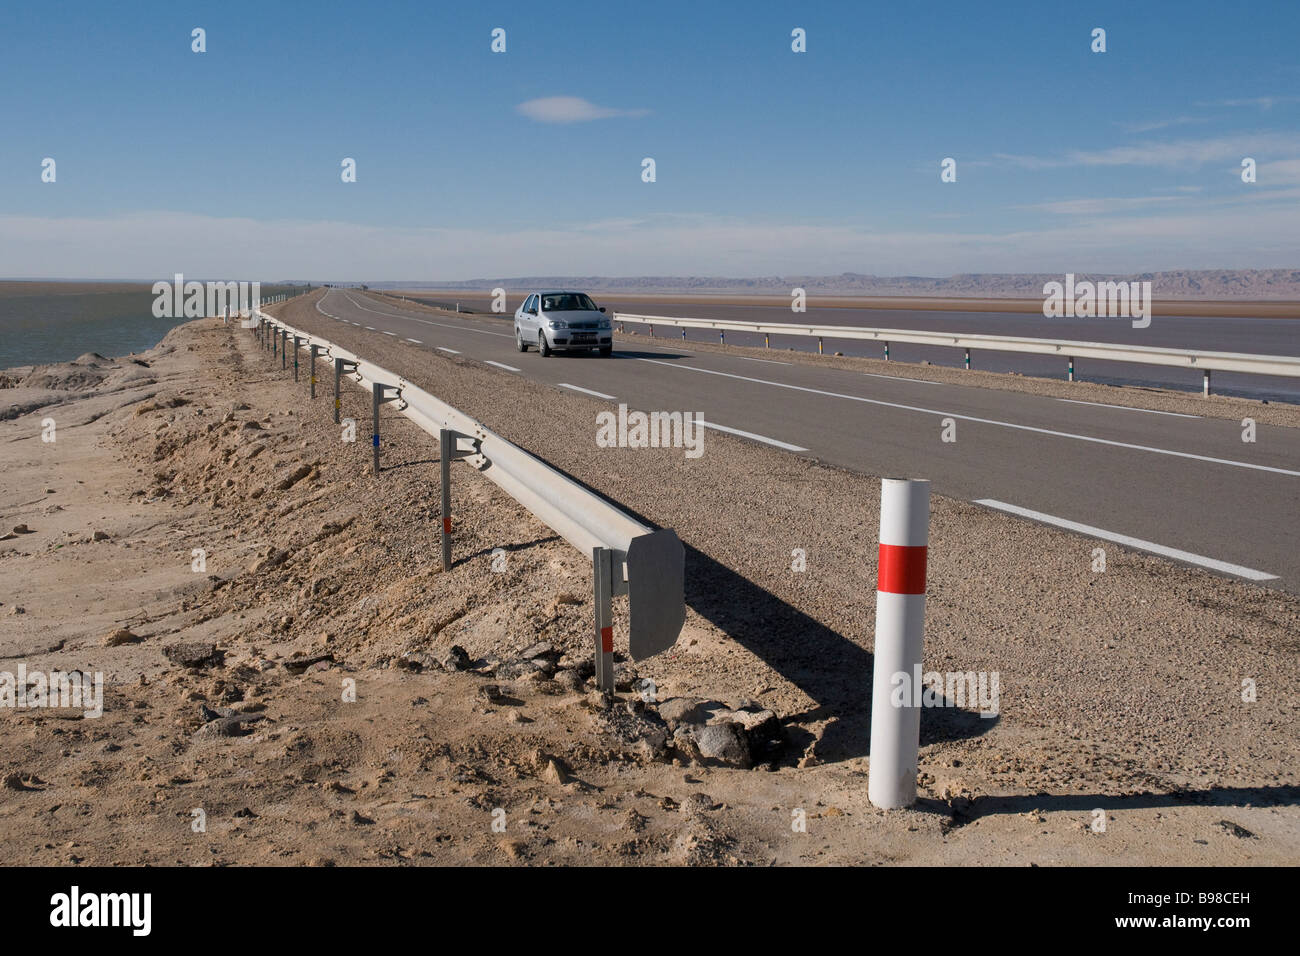 Two Tunisian southern towns, Douz and Tozeur, are joined by a tarred road built across a great sale lake, Chott el Jerid Stock Photo